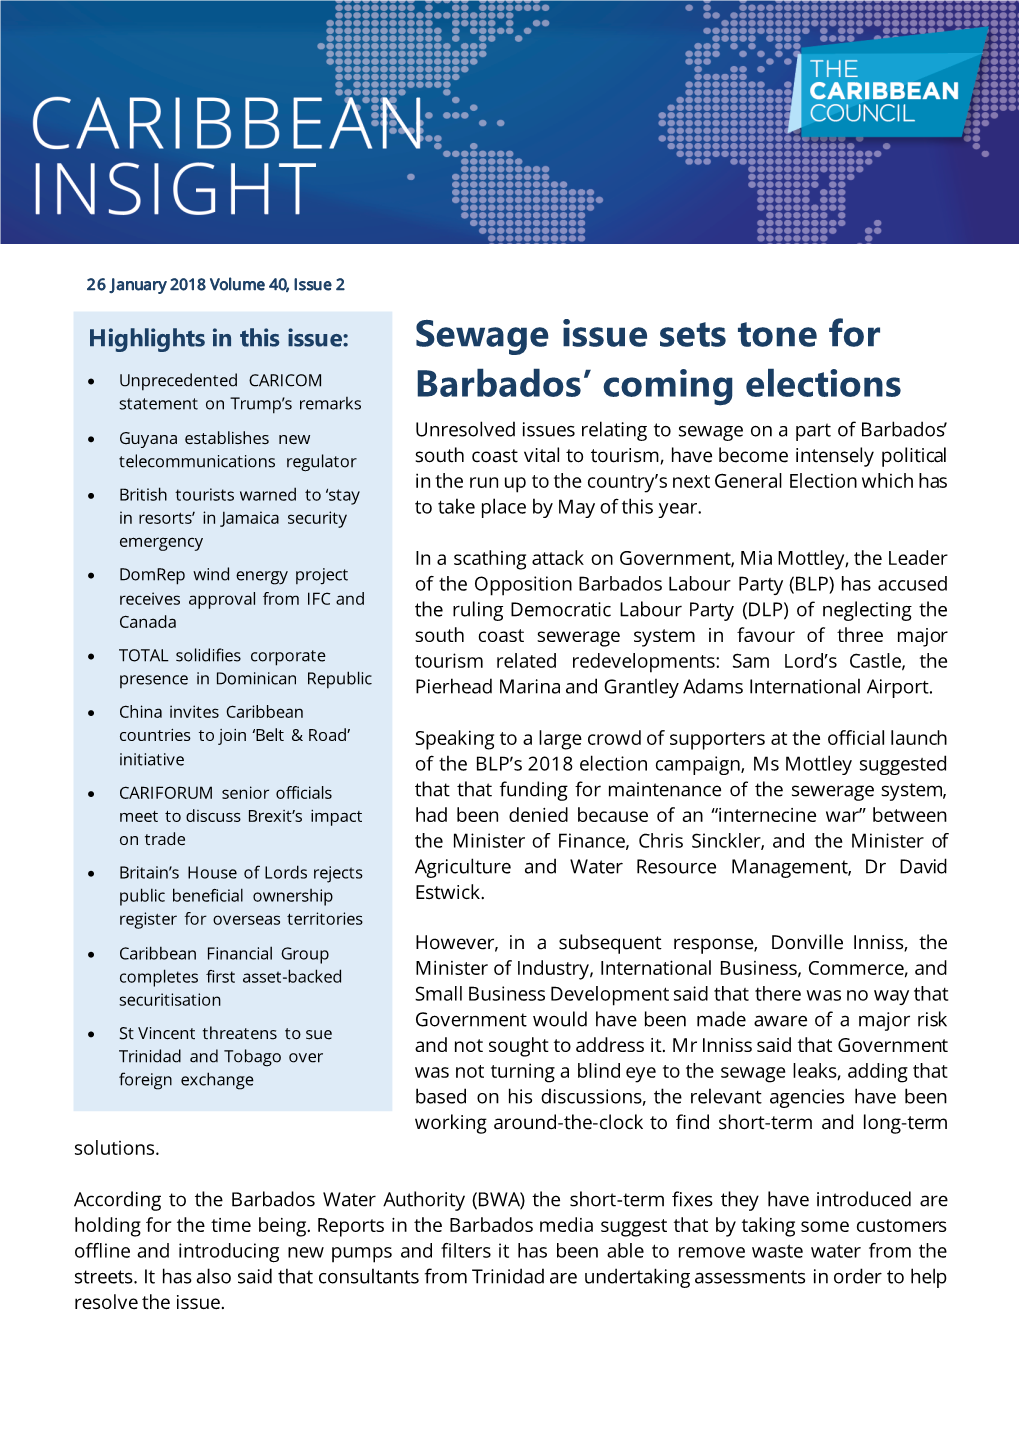 Sewage Issue Sets Tone for Barbados' Coming Elections